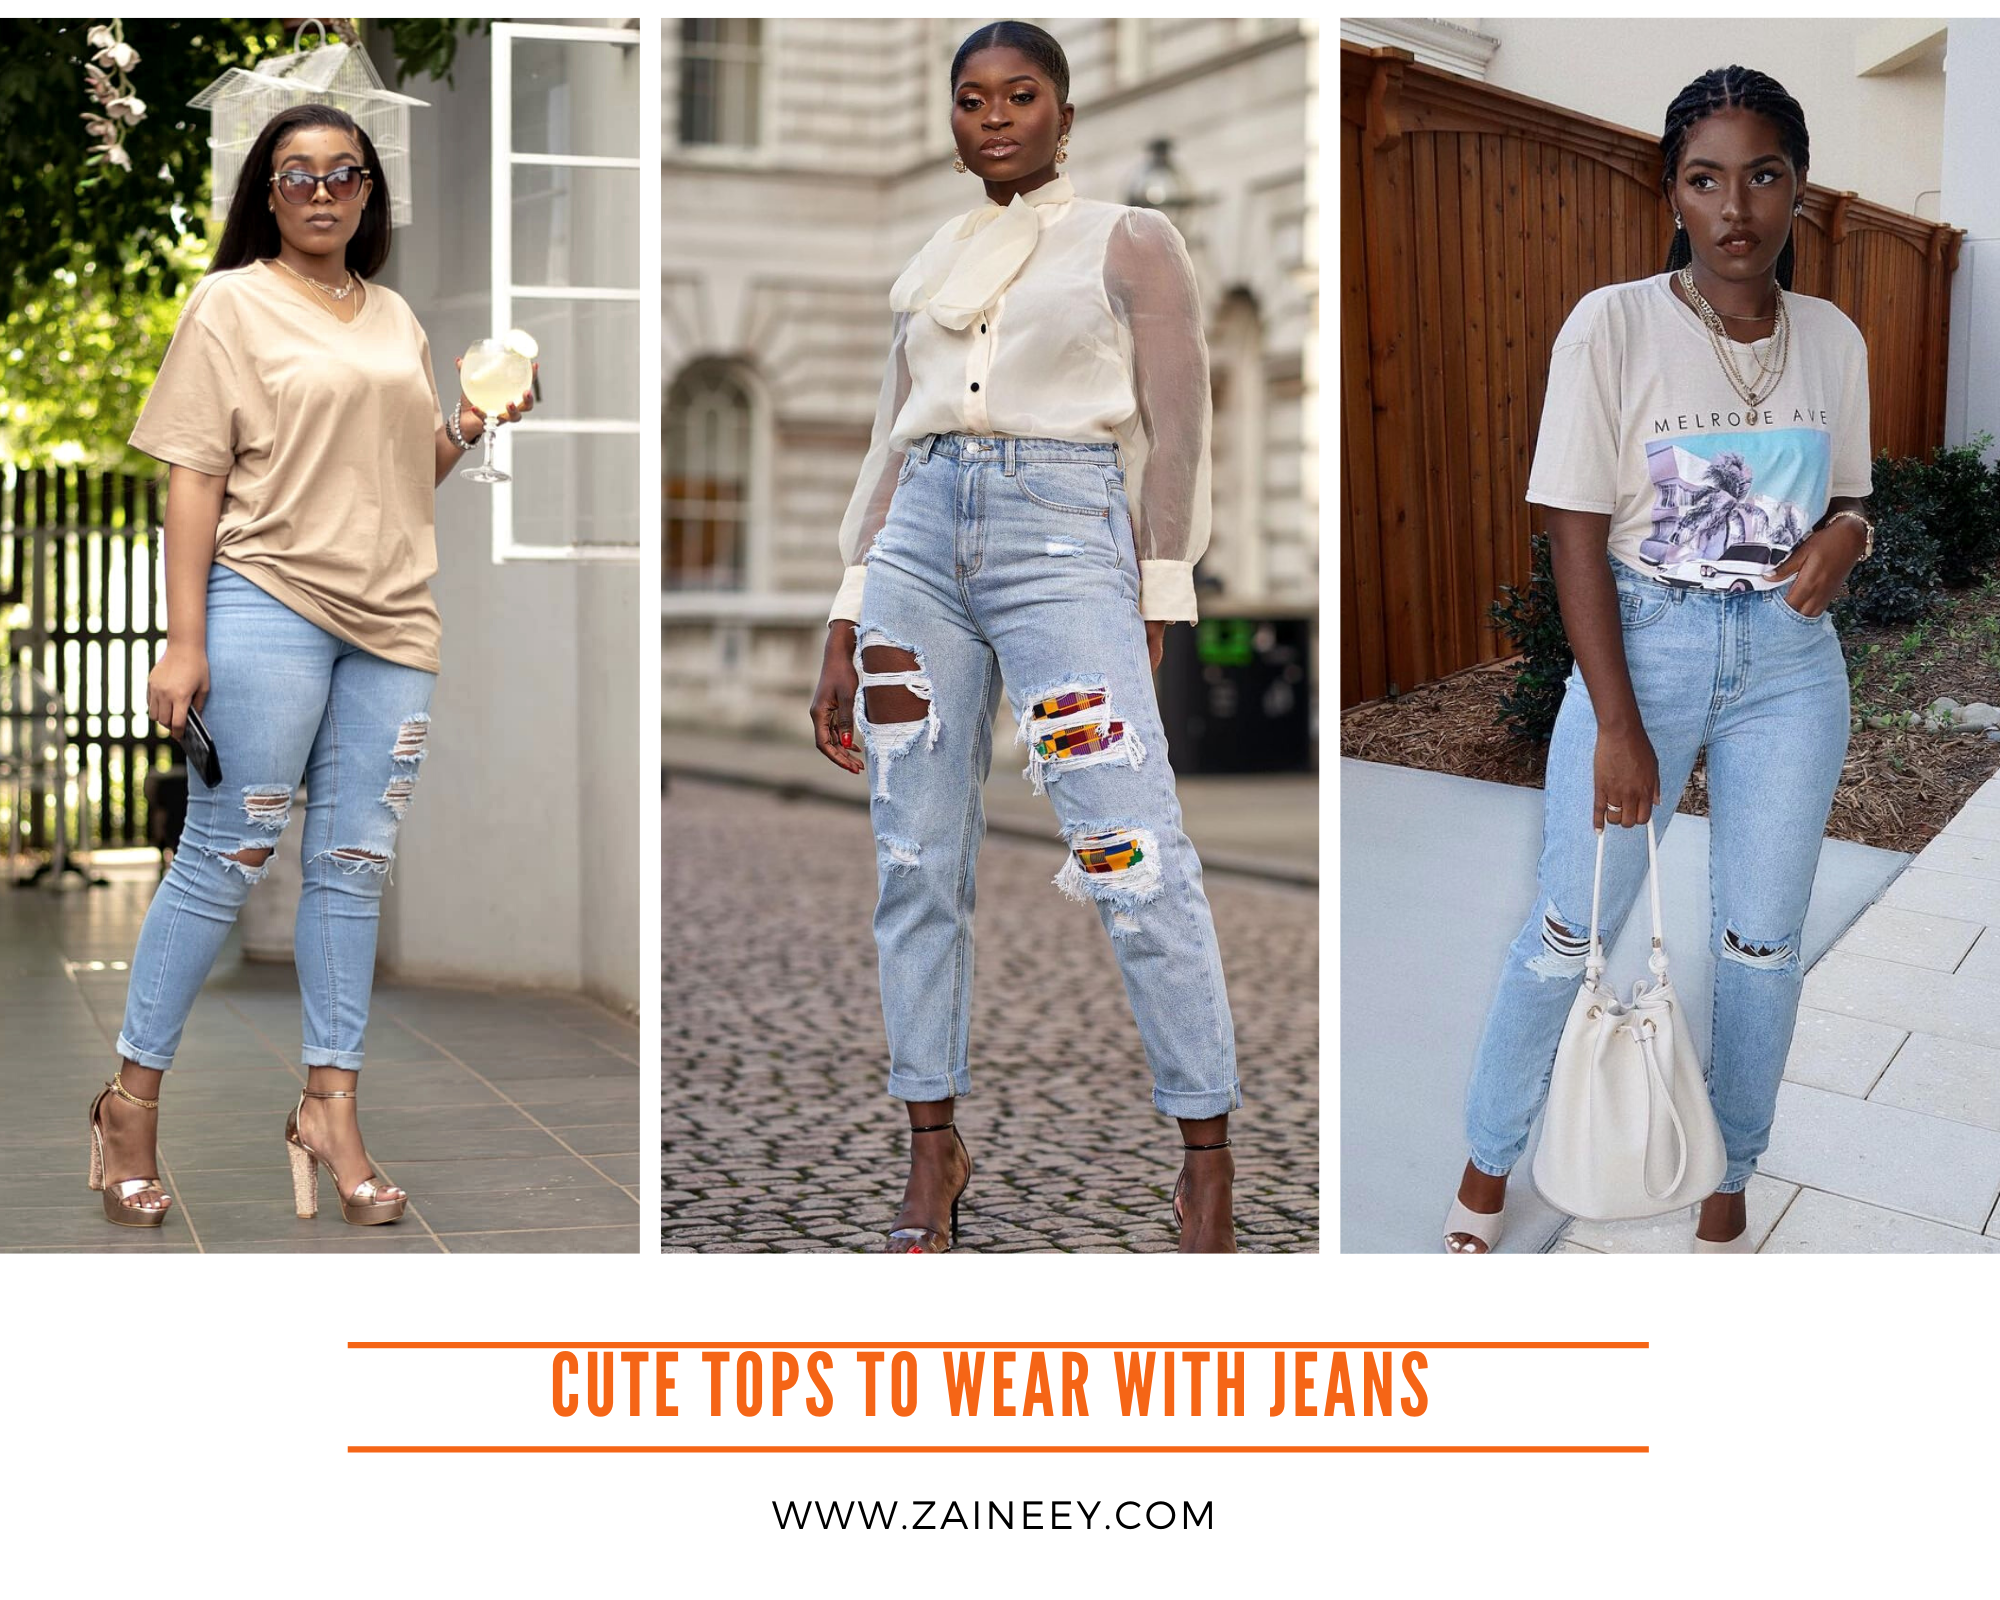 Beautiful, Classic and Cute Tops to wear with jeans